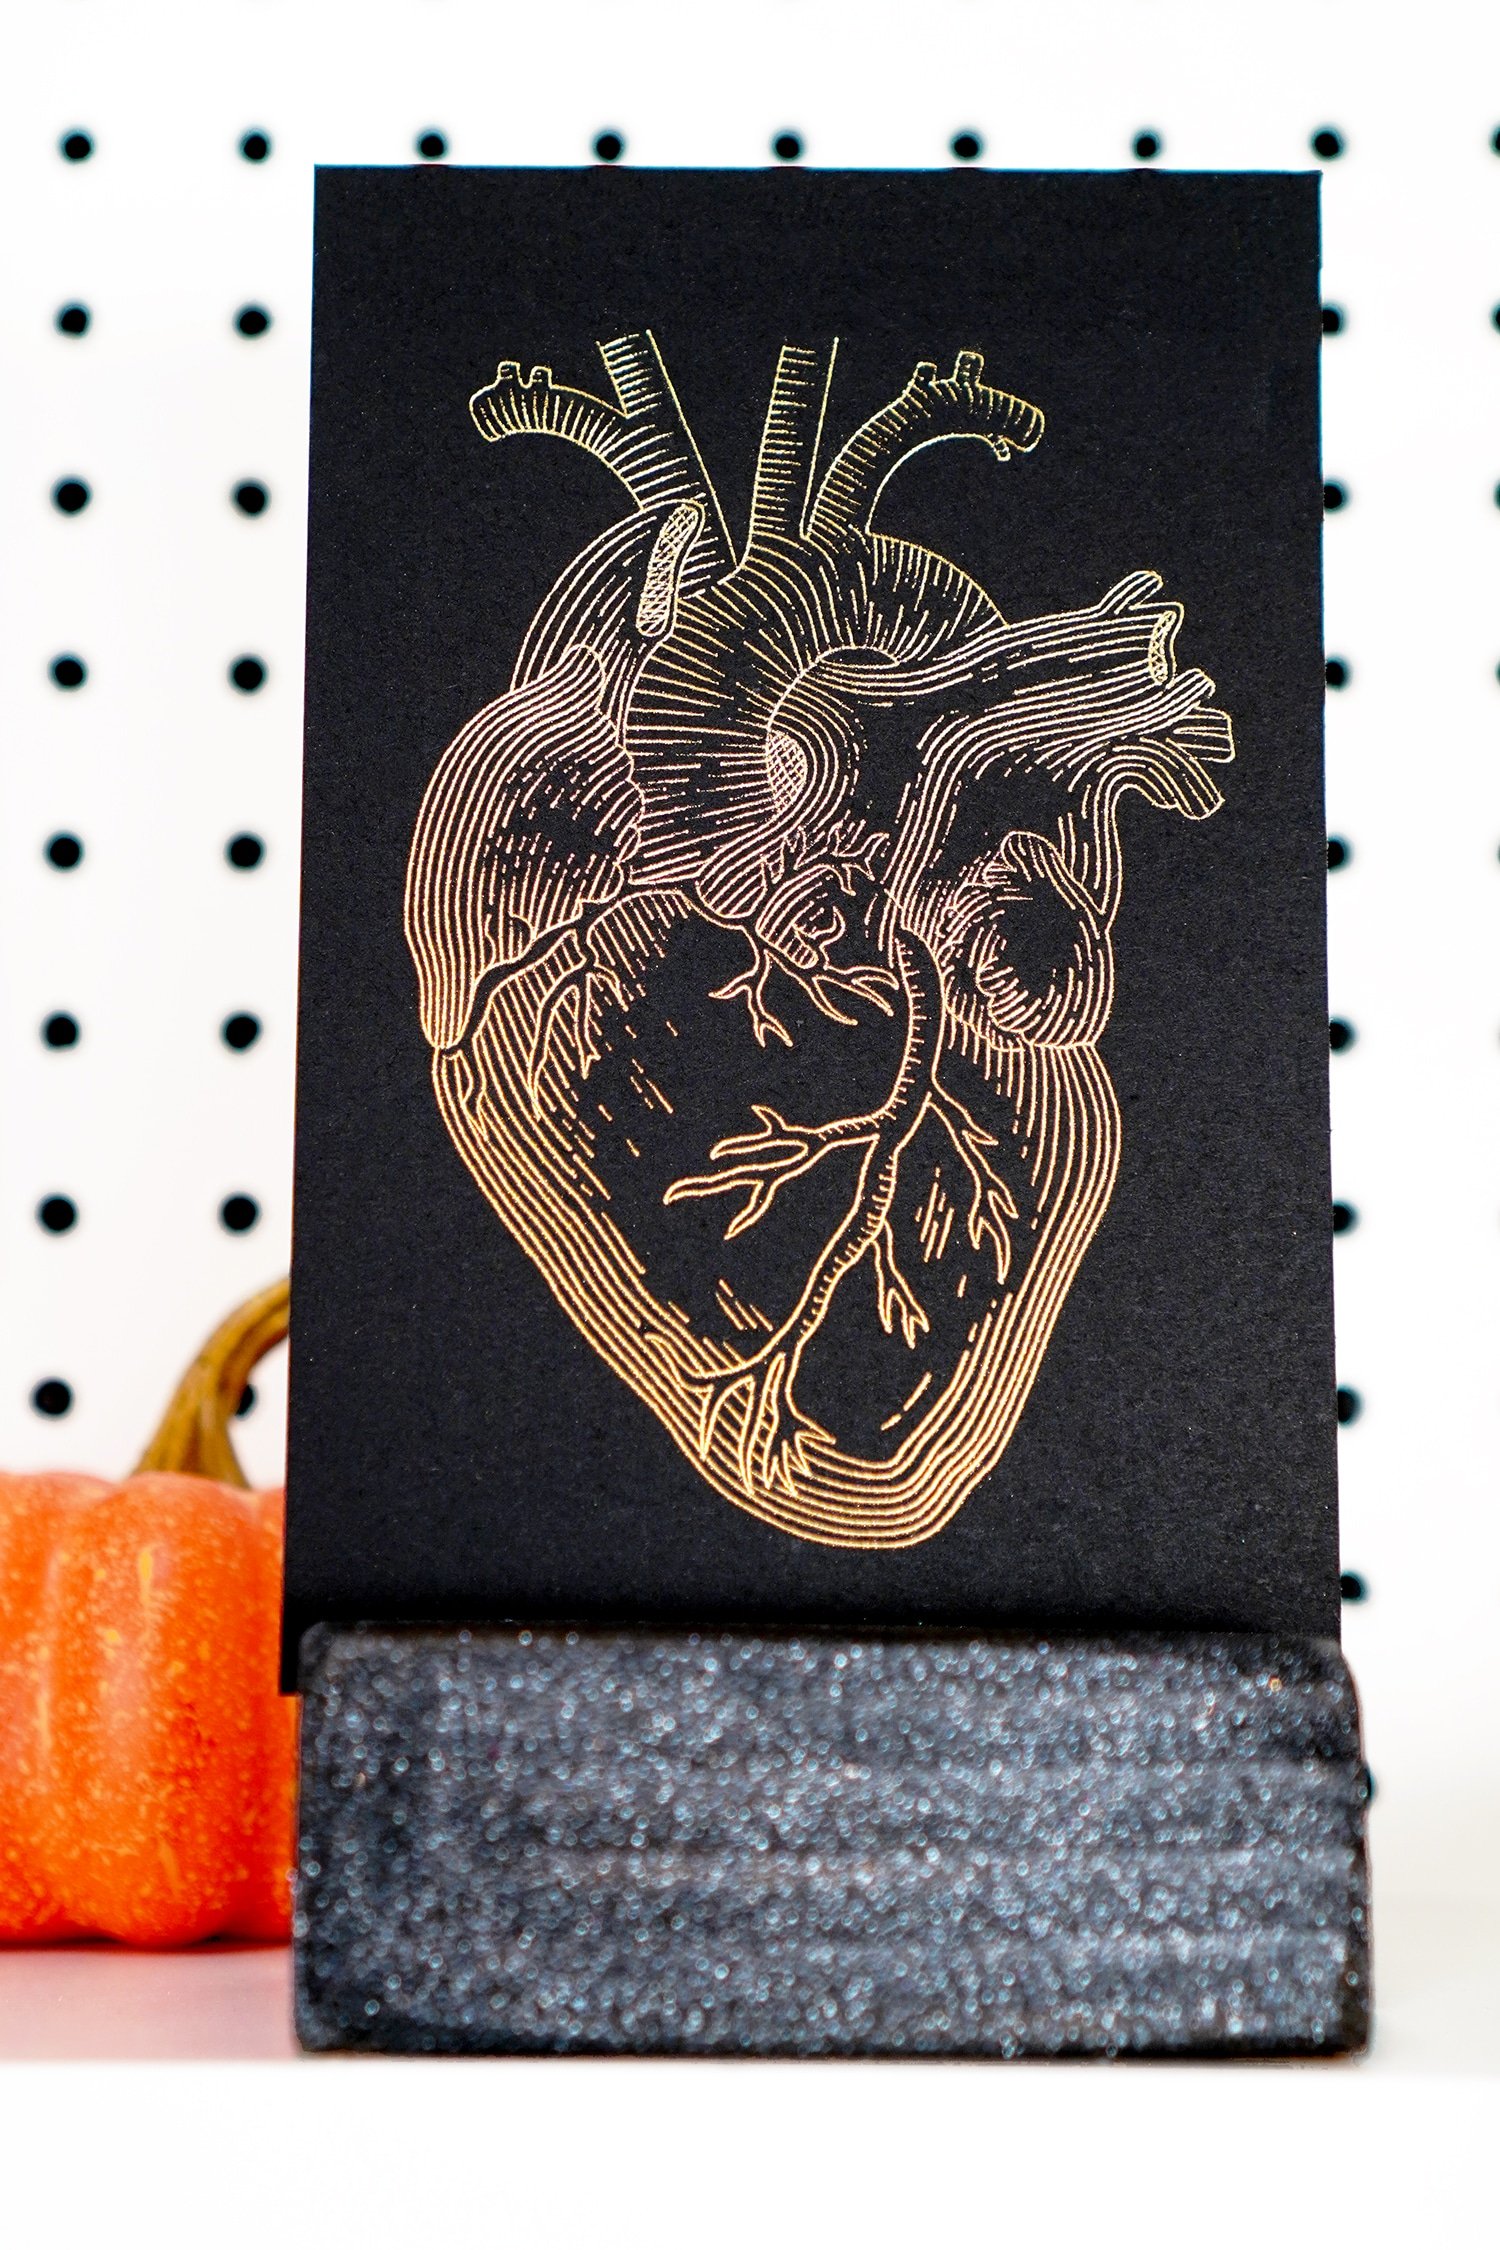 Gold and Black Anatomical Heart Foil Artwork with Cricut Foil Transfer System